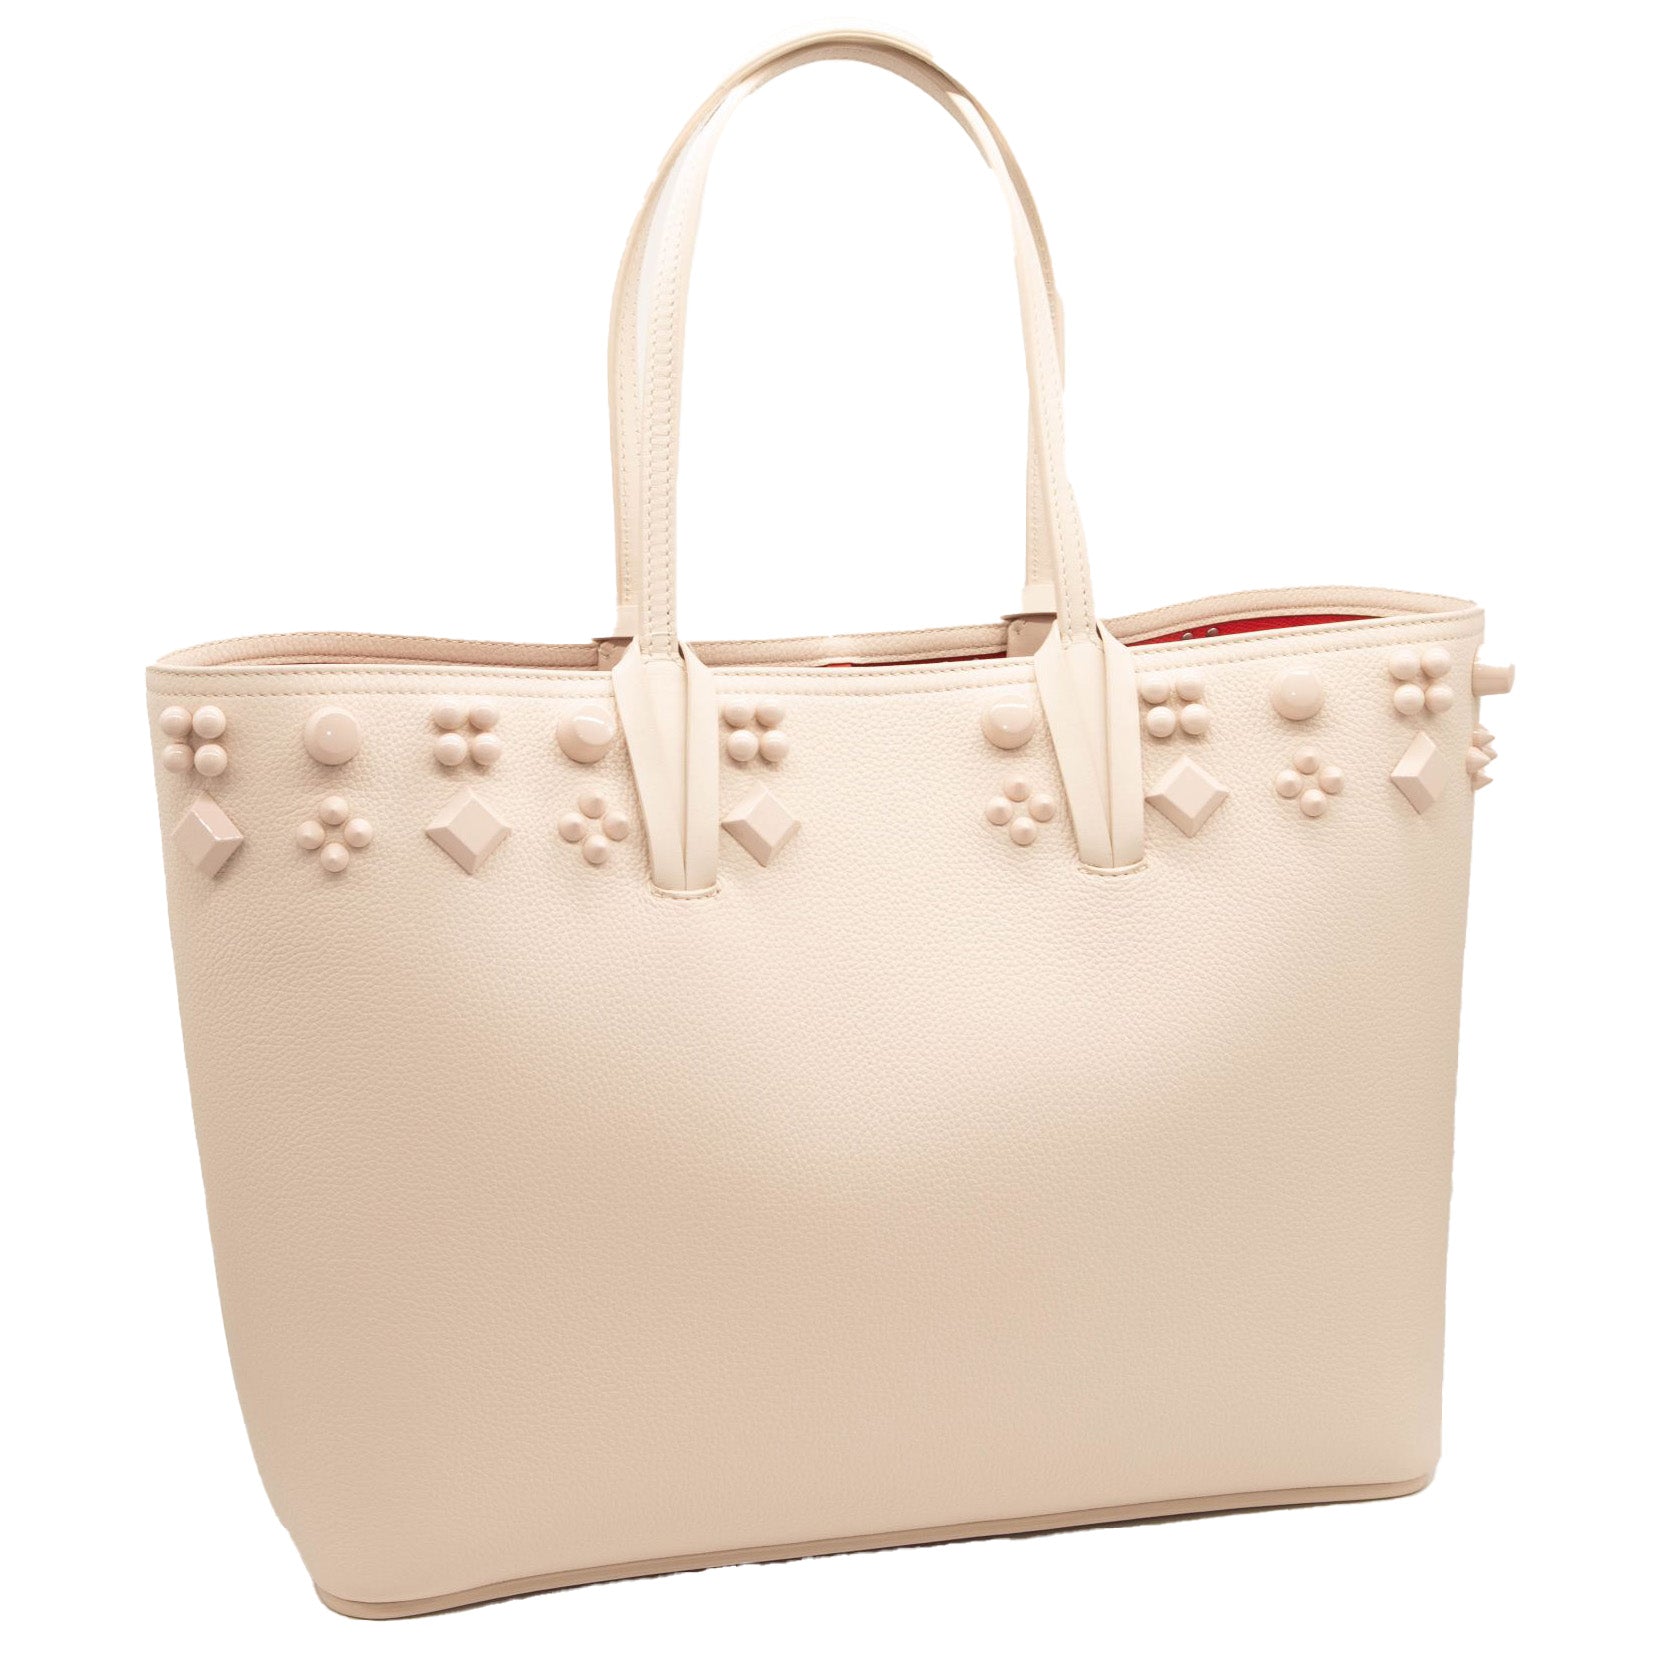 Cabata small - Tote bag - Calf leather and spikes - Black - Christian  Louboutin